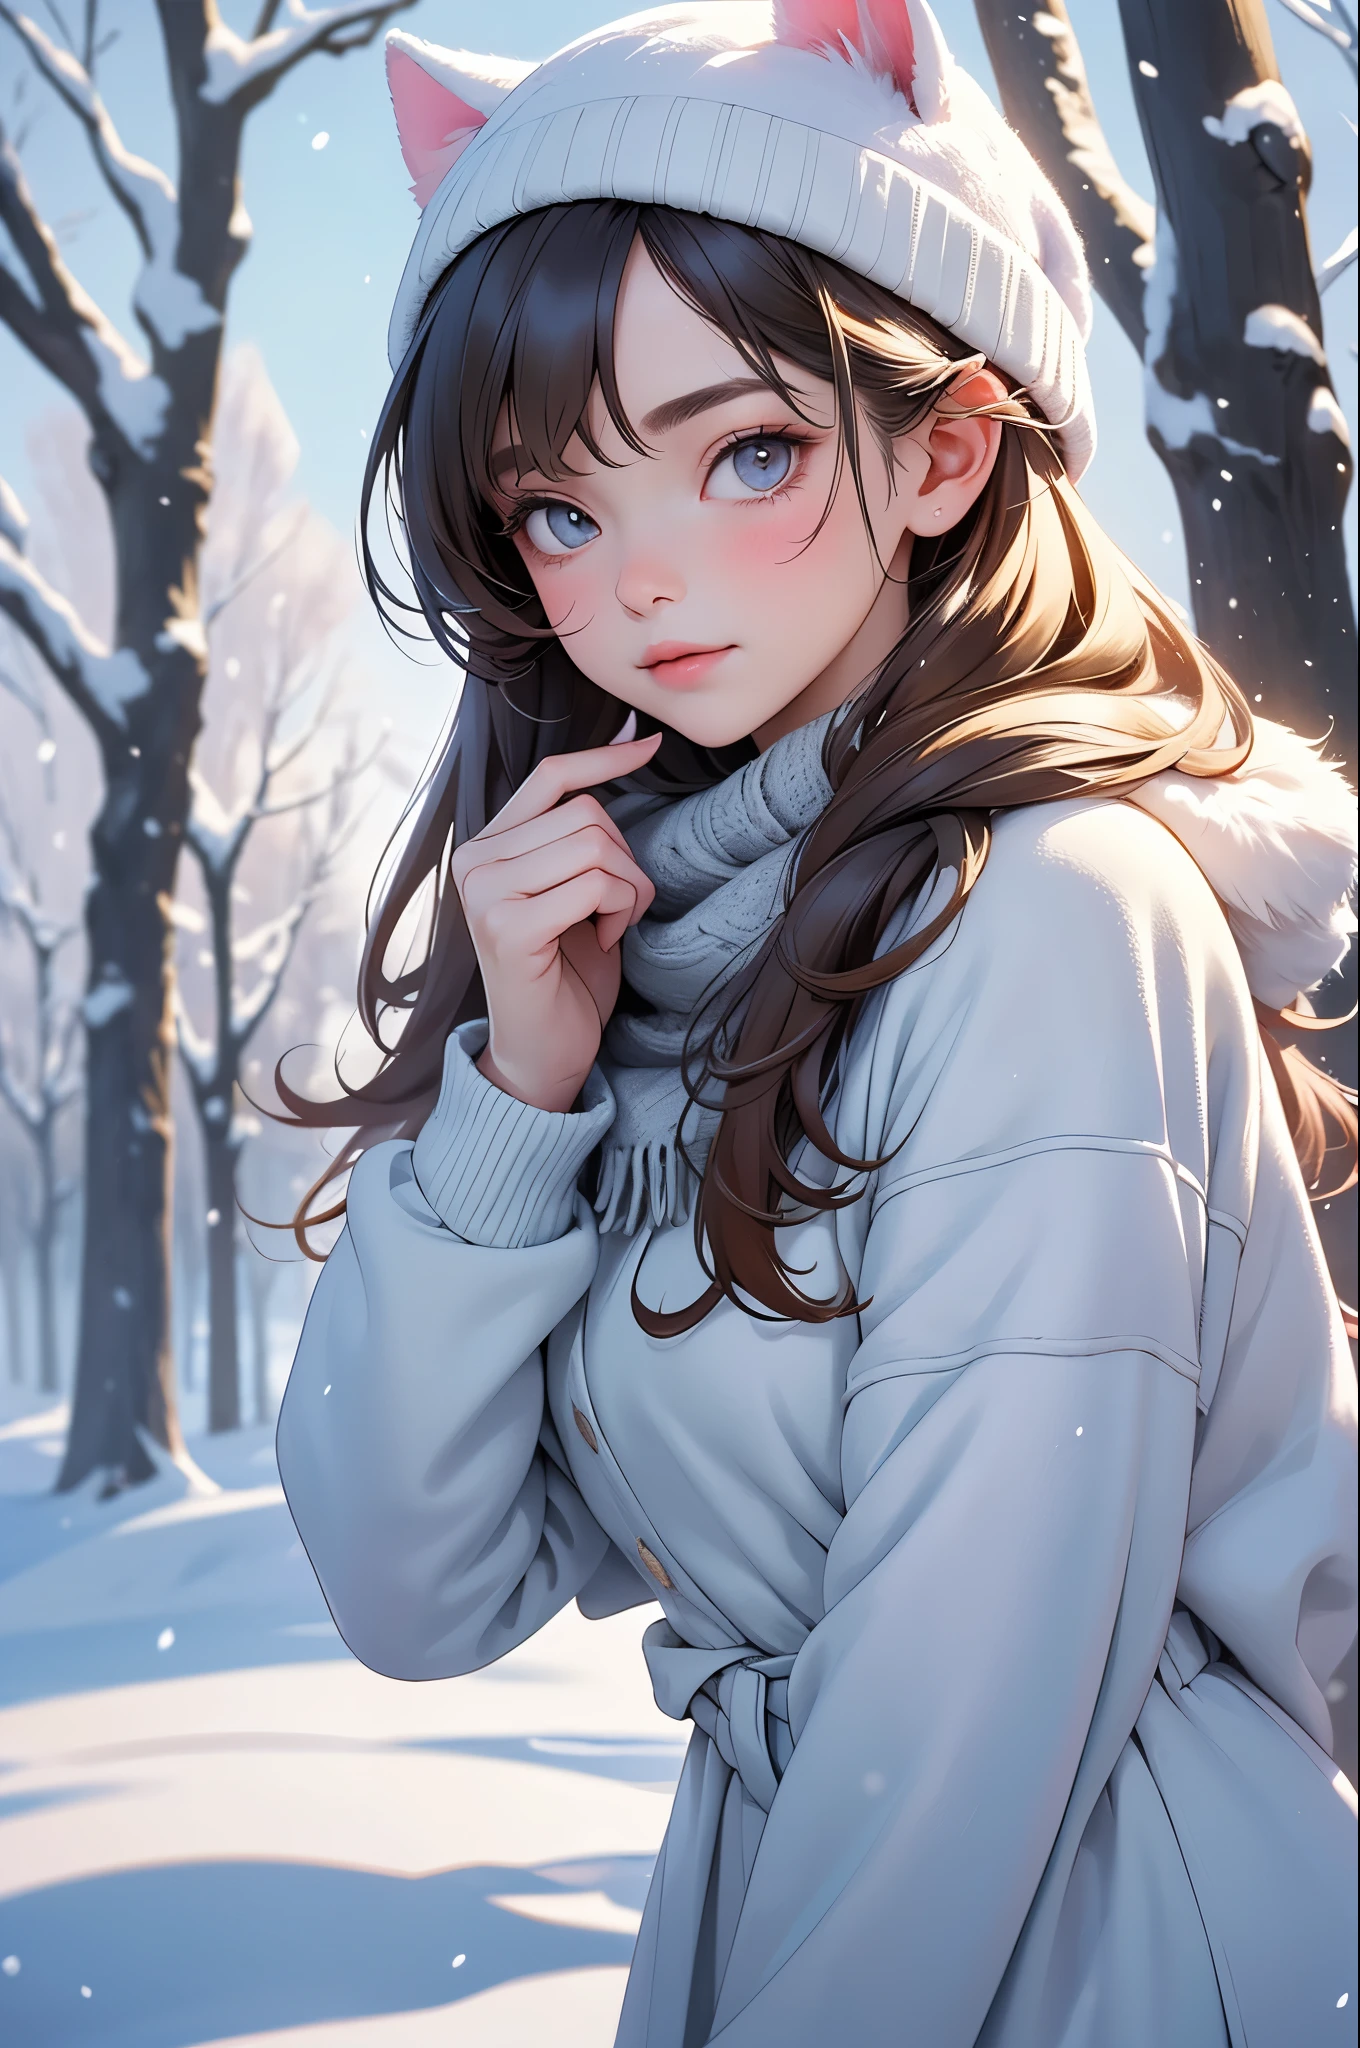 (best quality,4k,8k,highres,masterpiece:1.2),ultra-detailed,(realistic,photorealistic,photo-realistic:1.37),A cute cat girl with soft and fluffy white fur, with adorable detailed eyes and delicate pink nose and lips, standing in a snowy landscape. The girl has a sweet and innocent expression, with a hint of curiosity in her eyes. She is wearing a cozy winter outfit, with a knitted hat and scarf that match her fur color, adding extra cuteness to her appearance. The snowflakes are falling gently around her, creating a magical and dreamy atmosphere.

The snow-covered ground is pristine and pure, creating a soft and serene backdrop for the cat girl. The trees and foliage are partially covered in snow, with delicate branches peeking through the white blanket. The sunlight filters through the trees, casting a warm and gentle glow on the scene, enhancing the overall enchanting ambiance.

The color palette is dominated by shades of white and soft pastels, creating a calm and soothing atmosphere. The cat girl's fur is a mixture of whites and creams, with slight hints of pink blush on her cheeks. The landscape is bathed in cool tones of blue and gray, with subtle touches of pale pinks and purples in the sky and clouds.

The lighting is soft and diffused, with a gentle backlight illuminating the cat girl's silhouette, creating a soft halo effect around her. The shadows cast by the trees add depth and dimension to the scene, enhancing its overall realism.

This prompt will deliver a stunning and heartwarming masterpiece, showcasing the beauty of nature and the innocence of the cat girl in the snowy landscape.